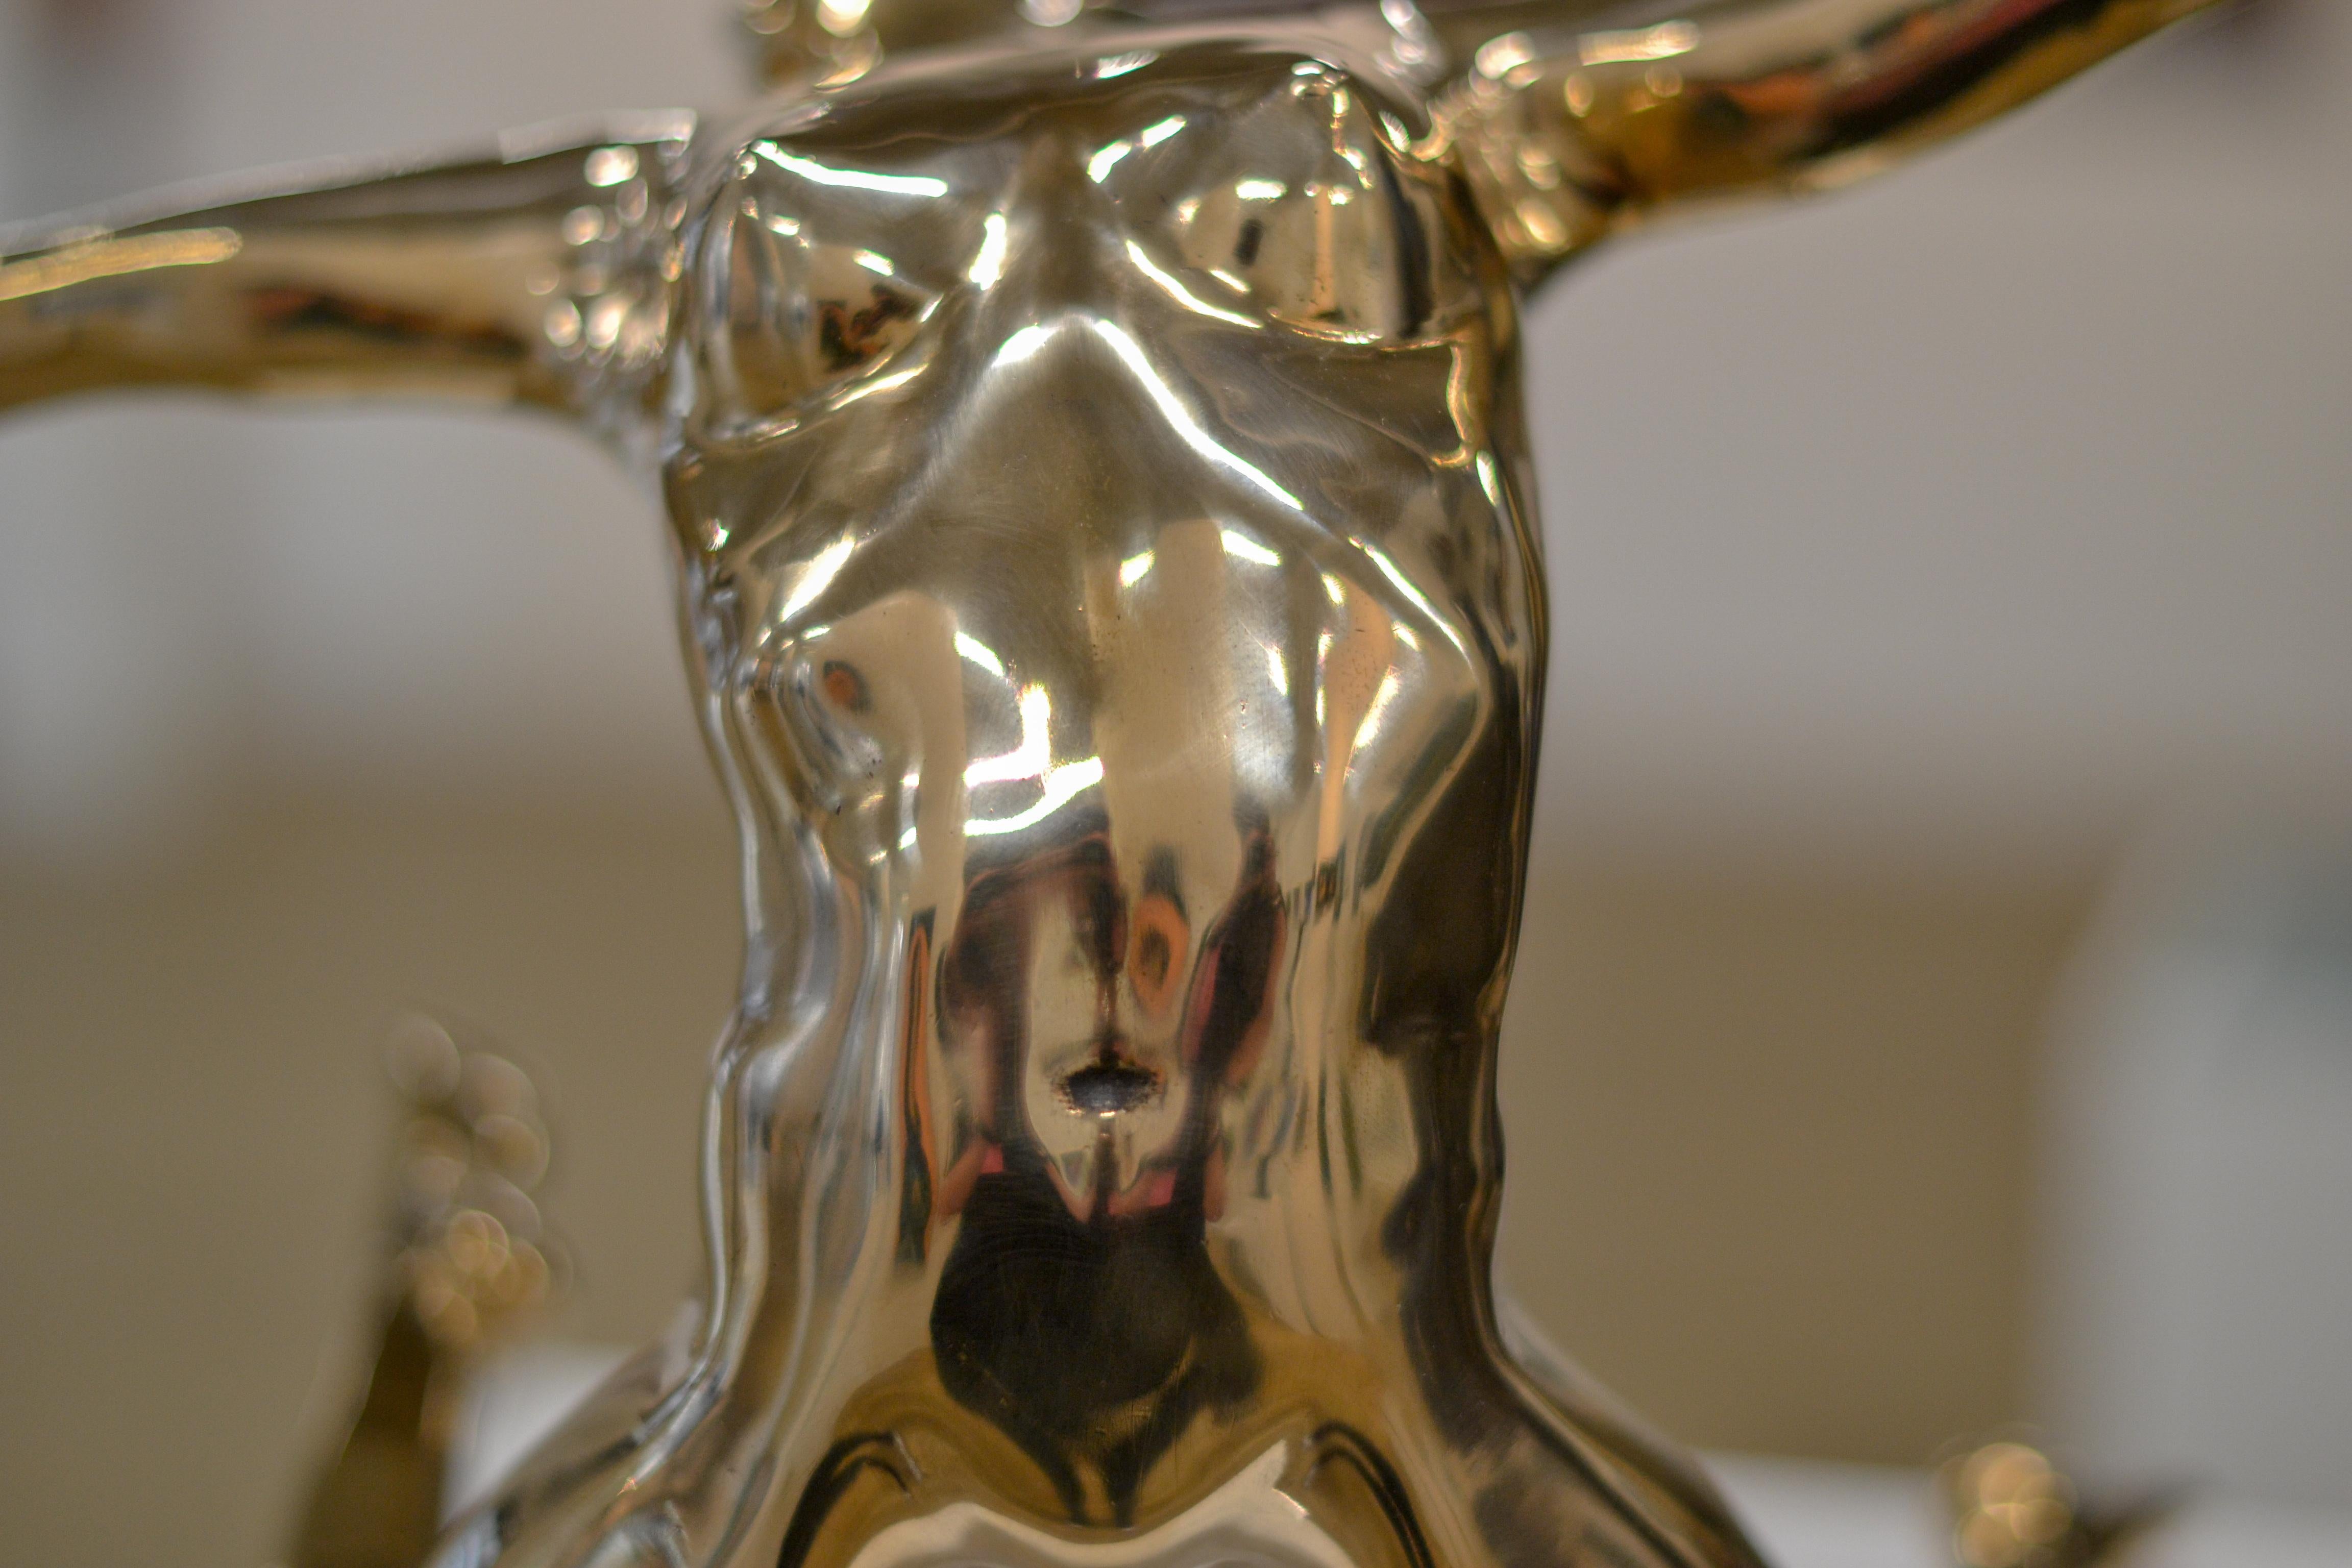 Open Arms - 21st Century Contemporary, Nude Woman Sculpture, Bronze  - Gold Nude Sculpture by Andries Velting